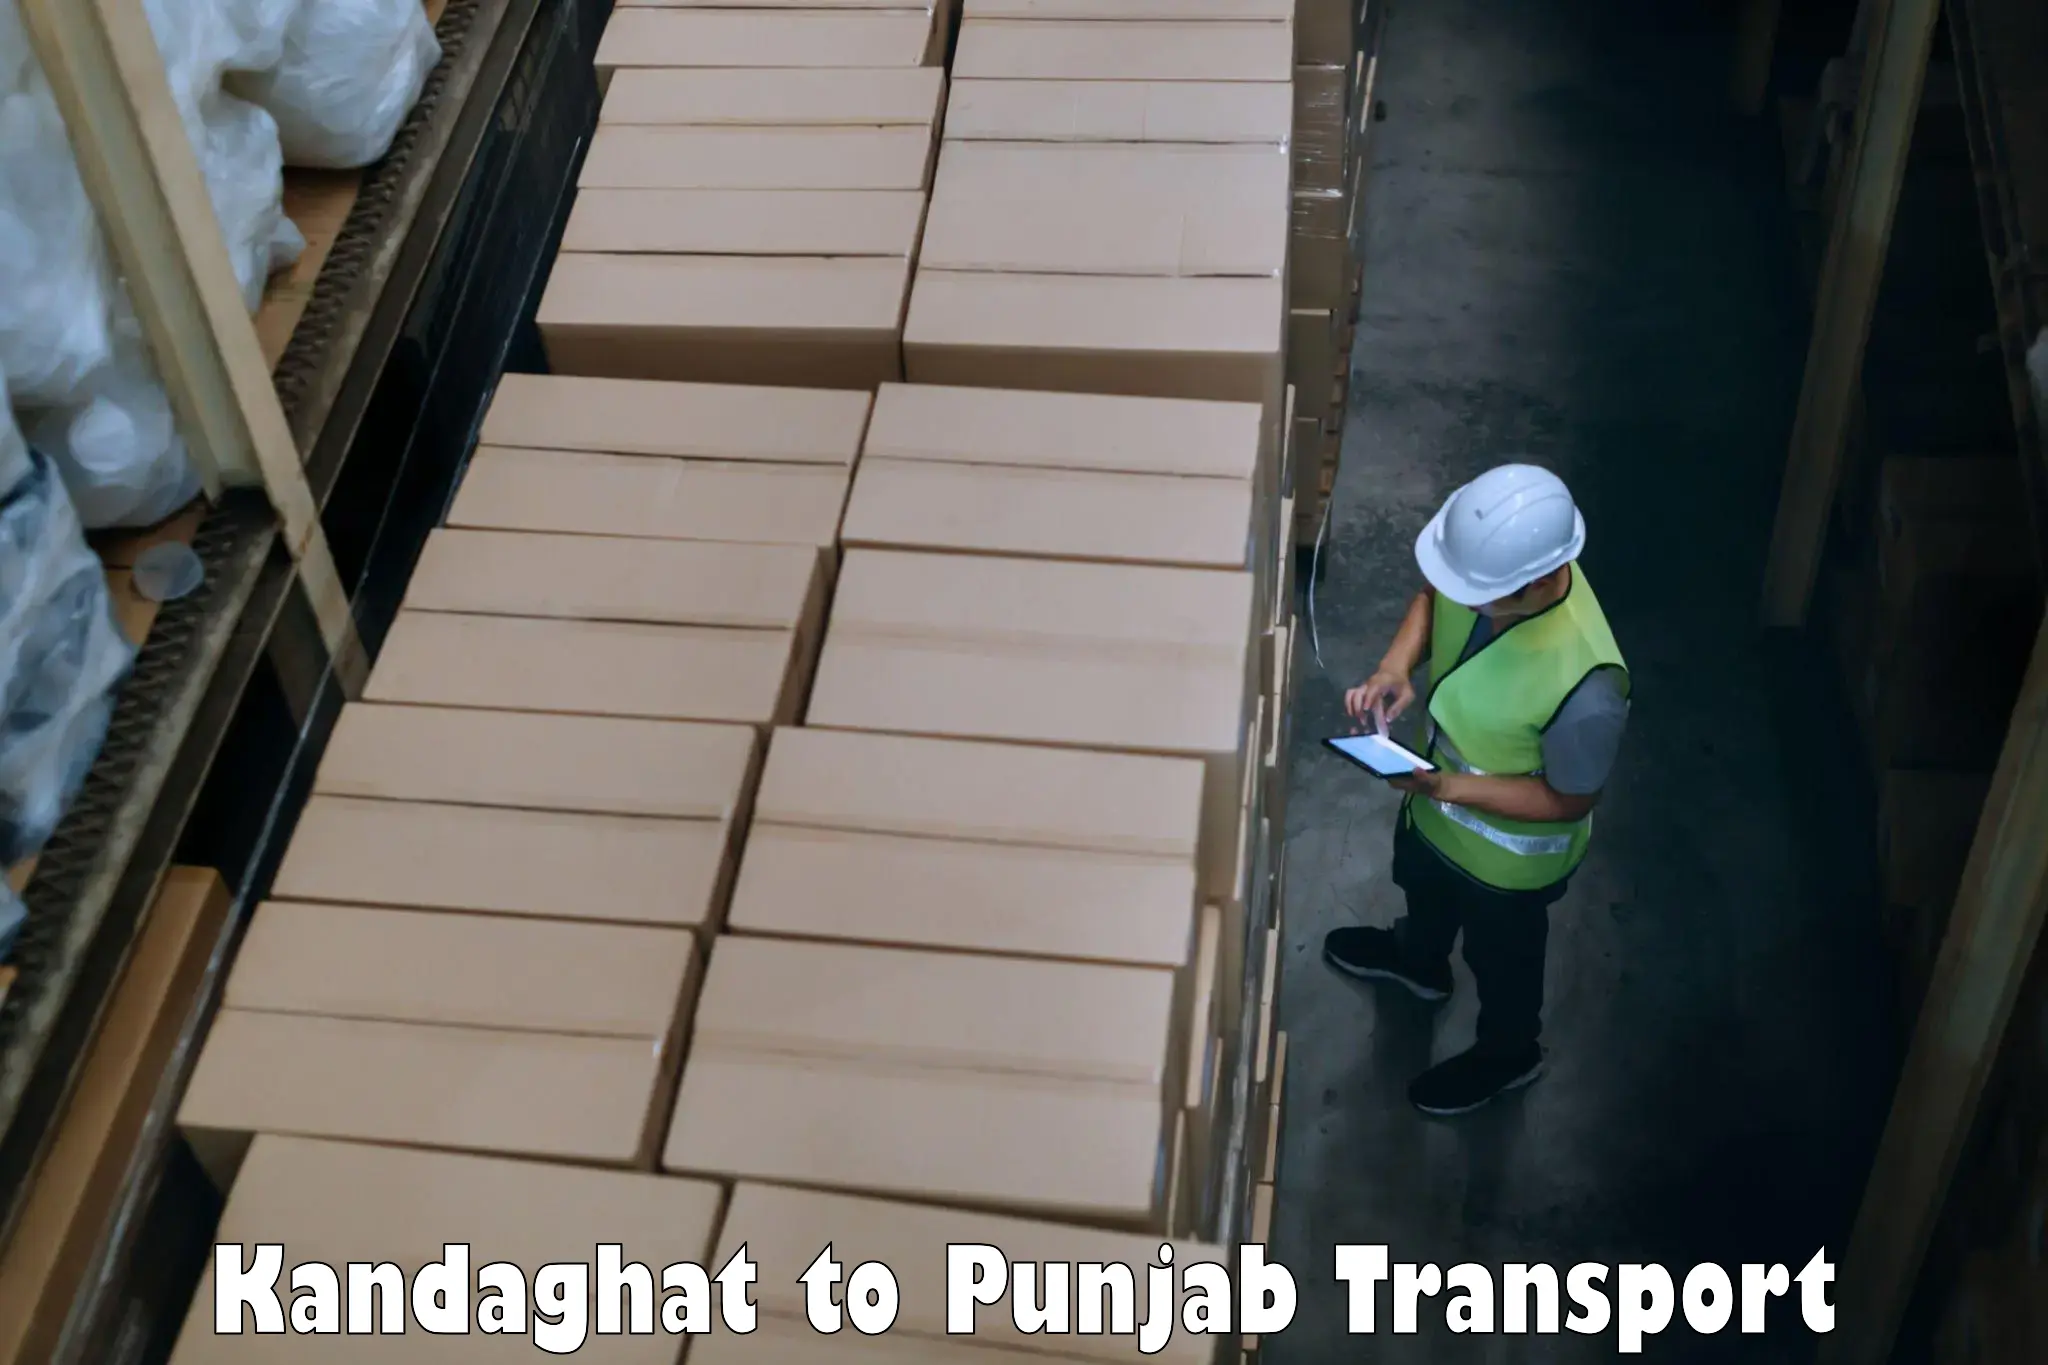 Luggage transport services in Kandaghat to Giddarbaha